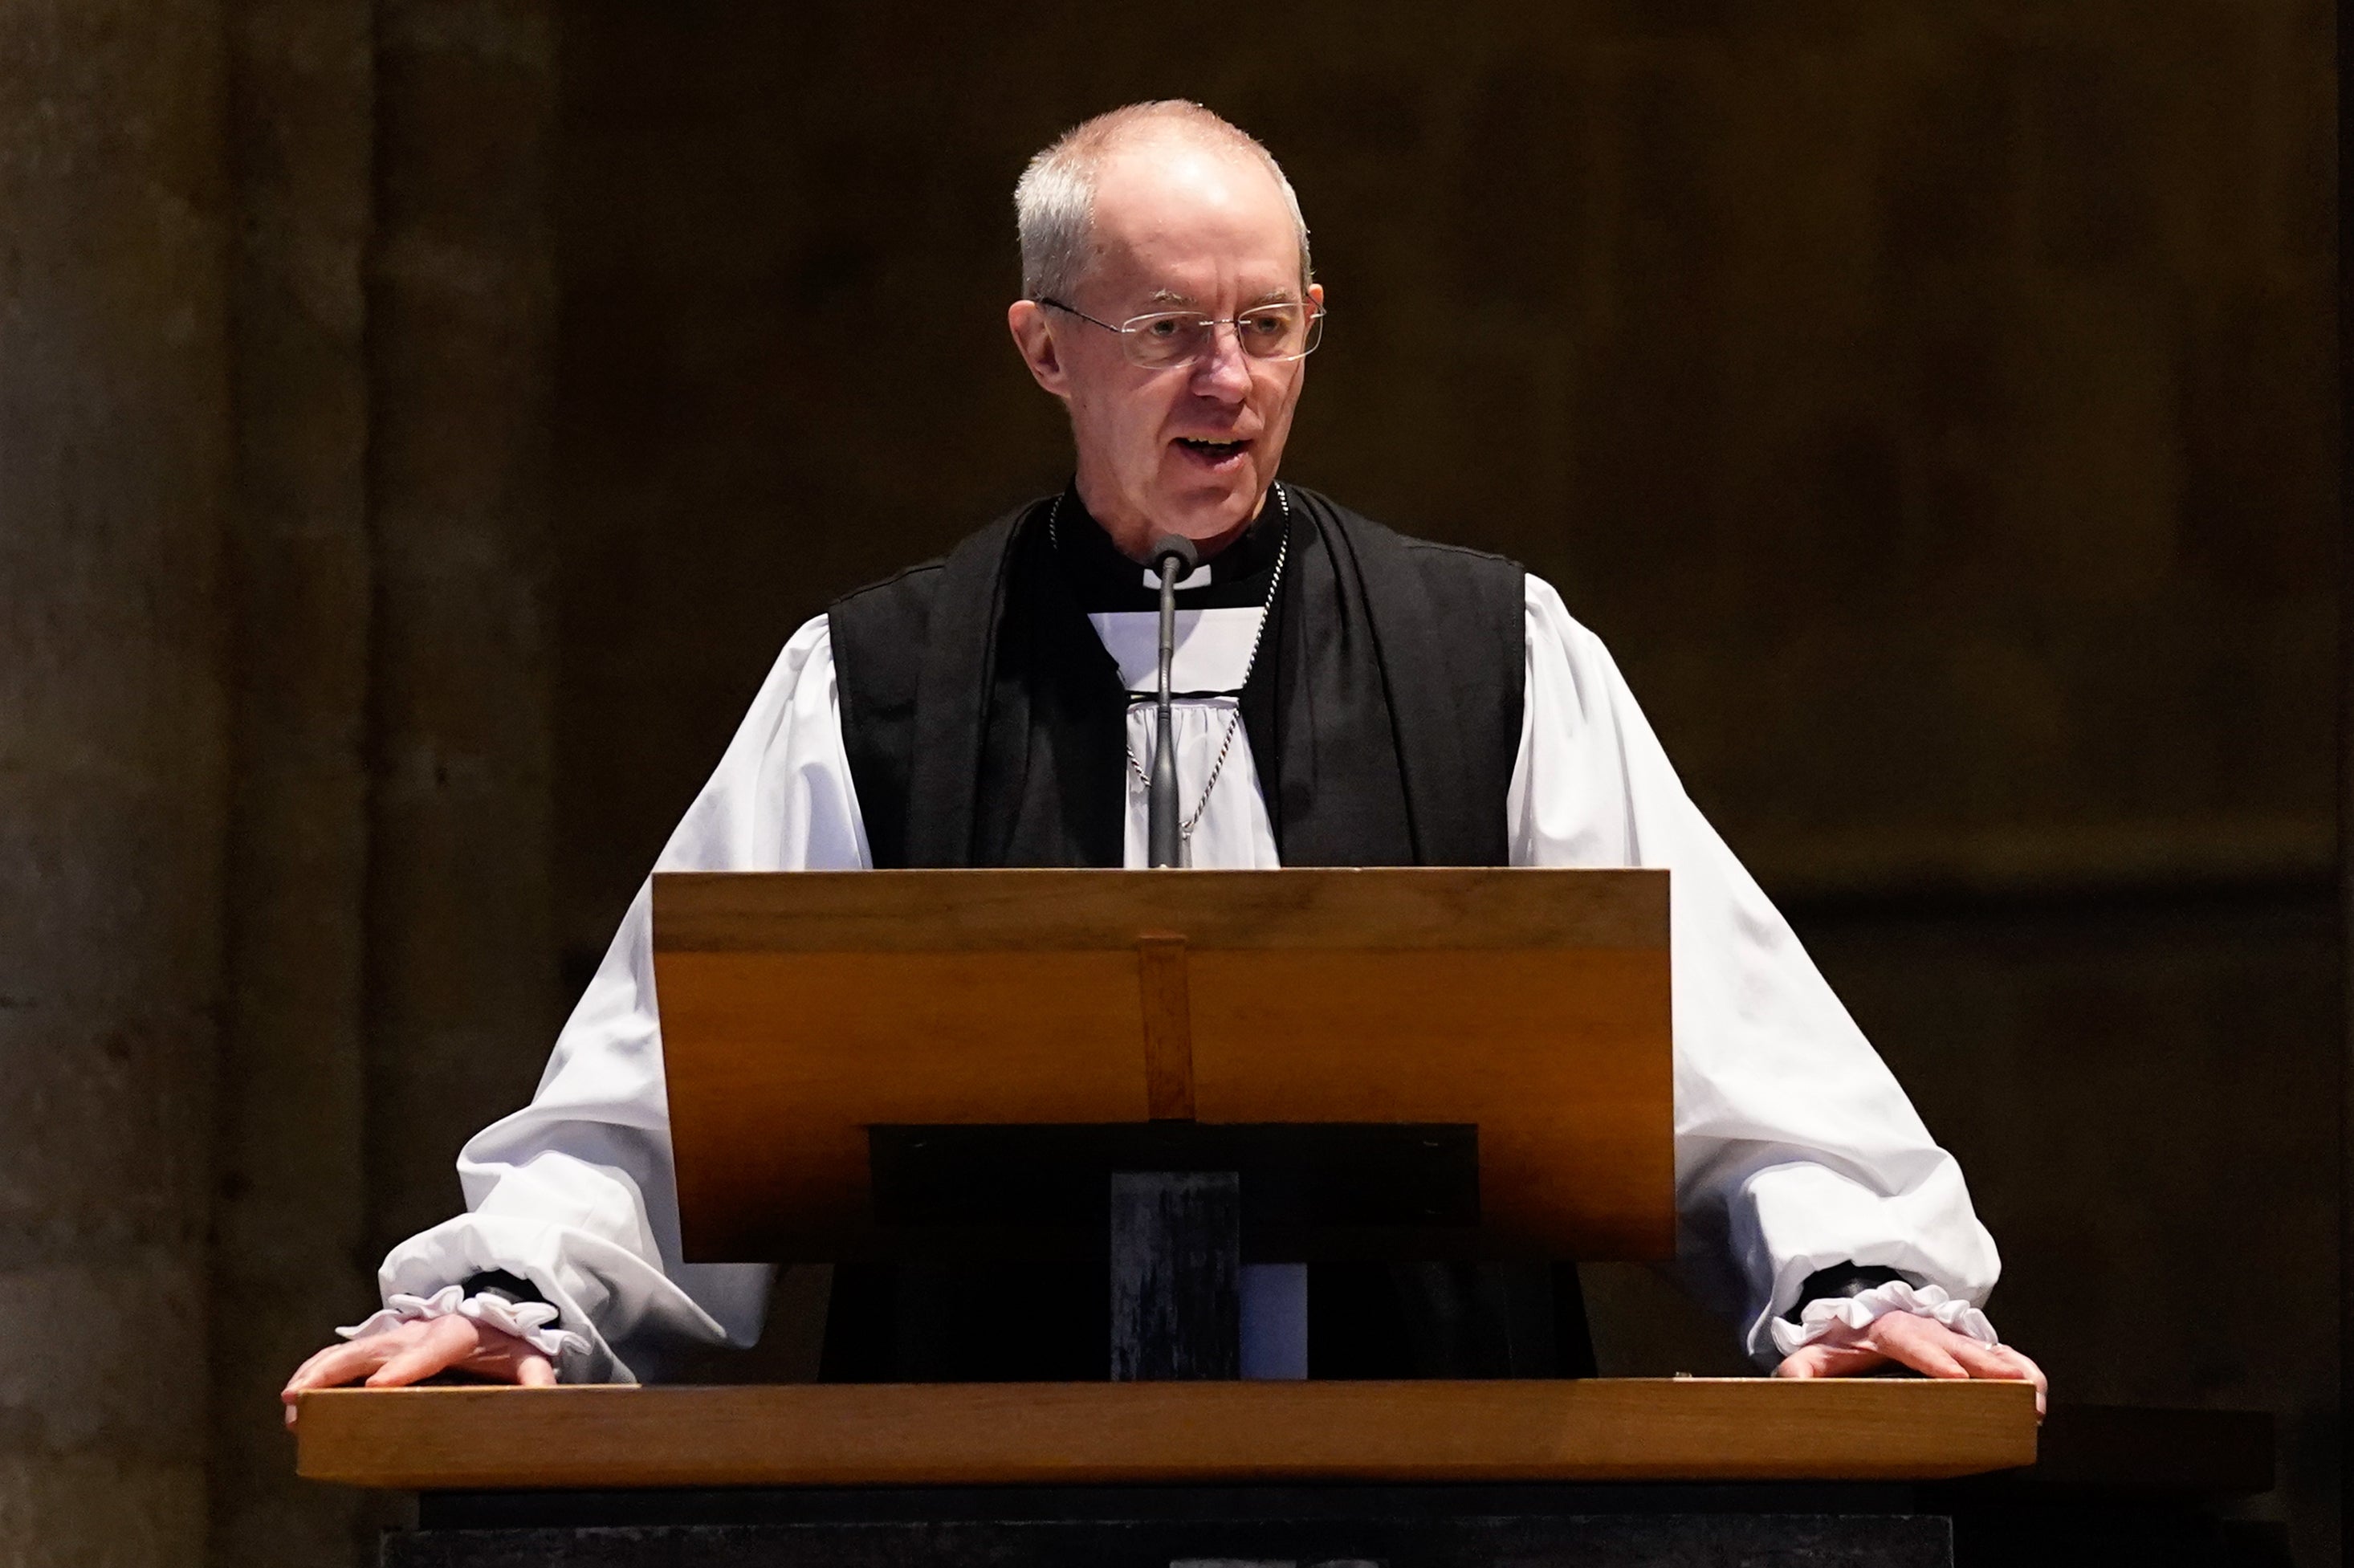 The Archbishop during Choral Evensong at Chichester Cathedral